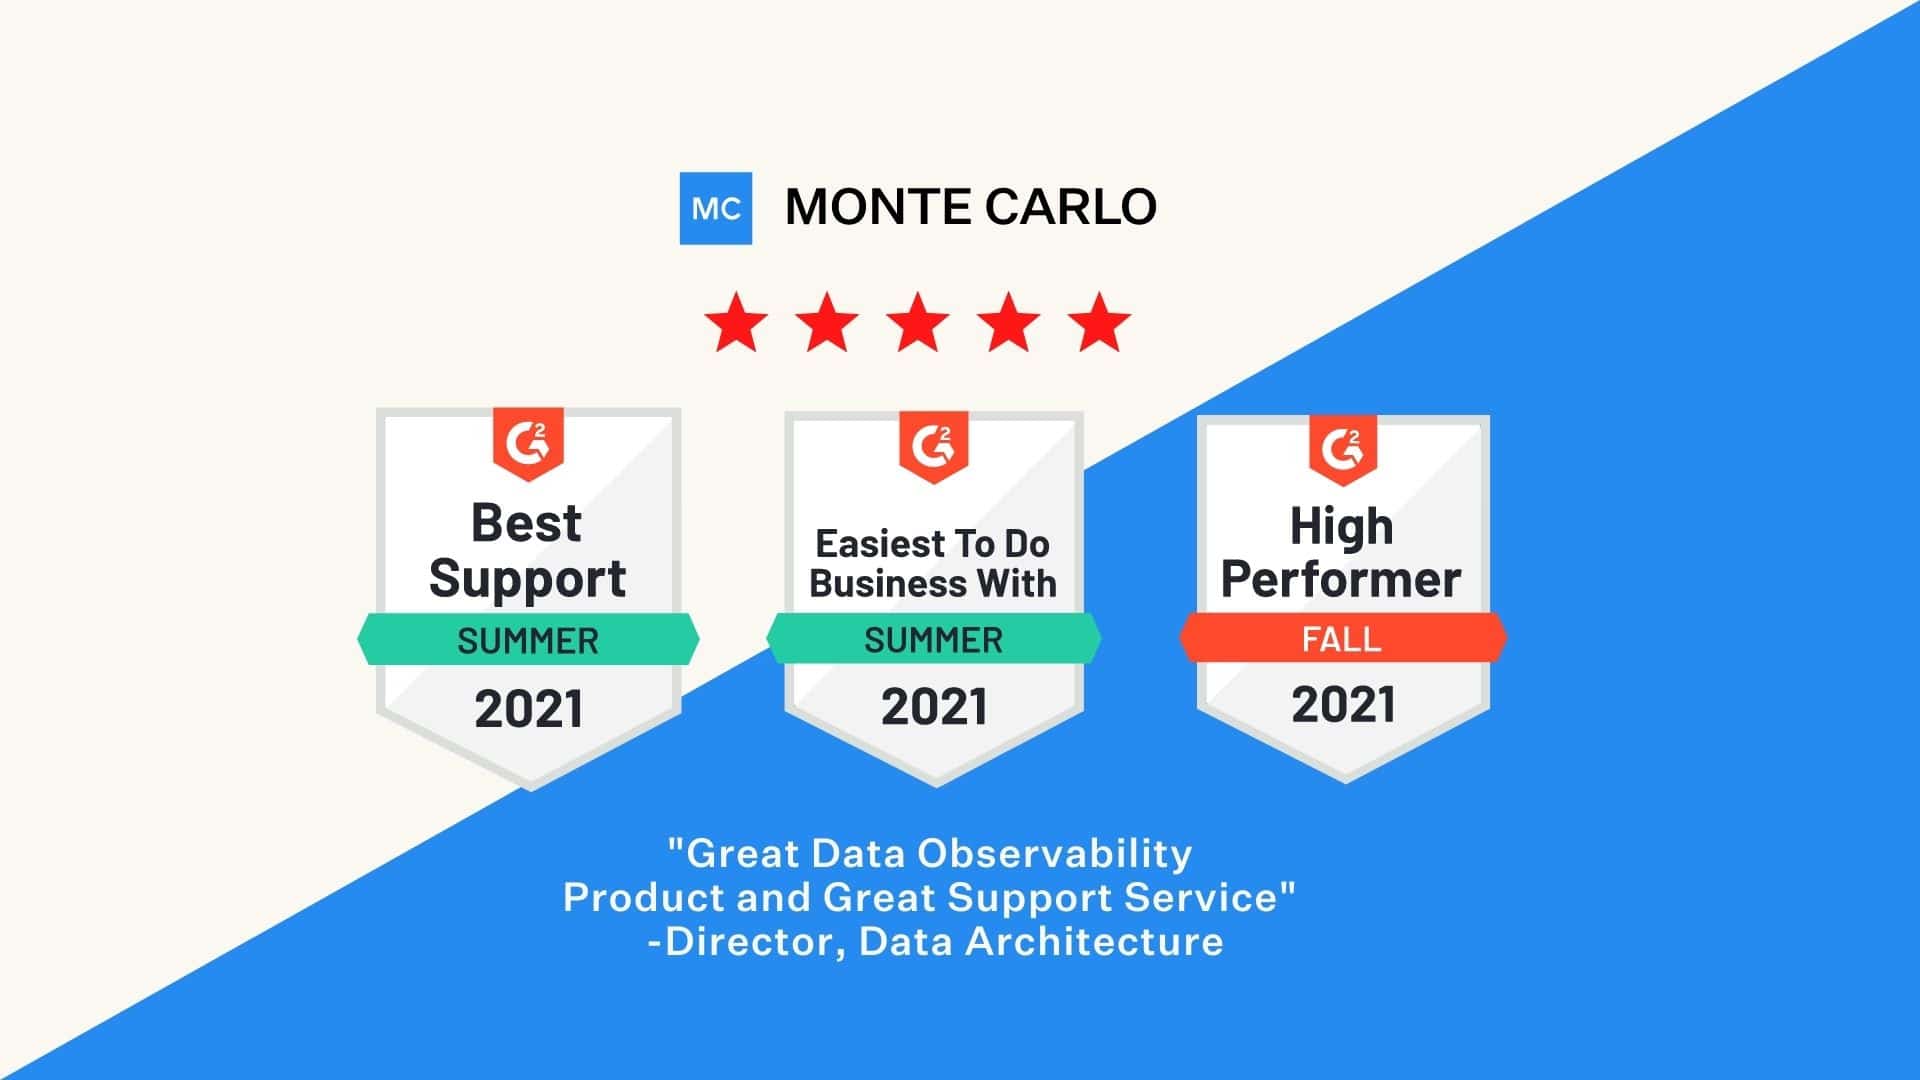 Monte Carlo Recognized as a DataOps Leader by G2